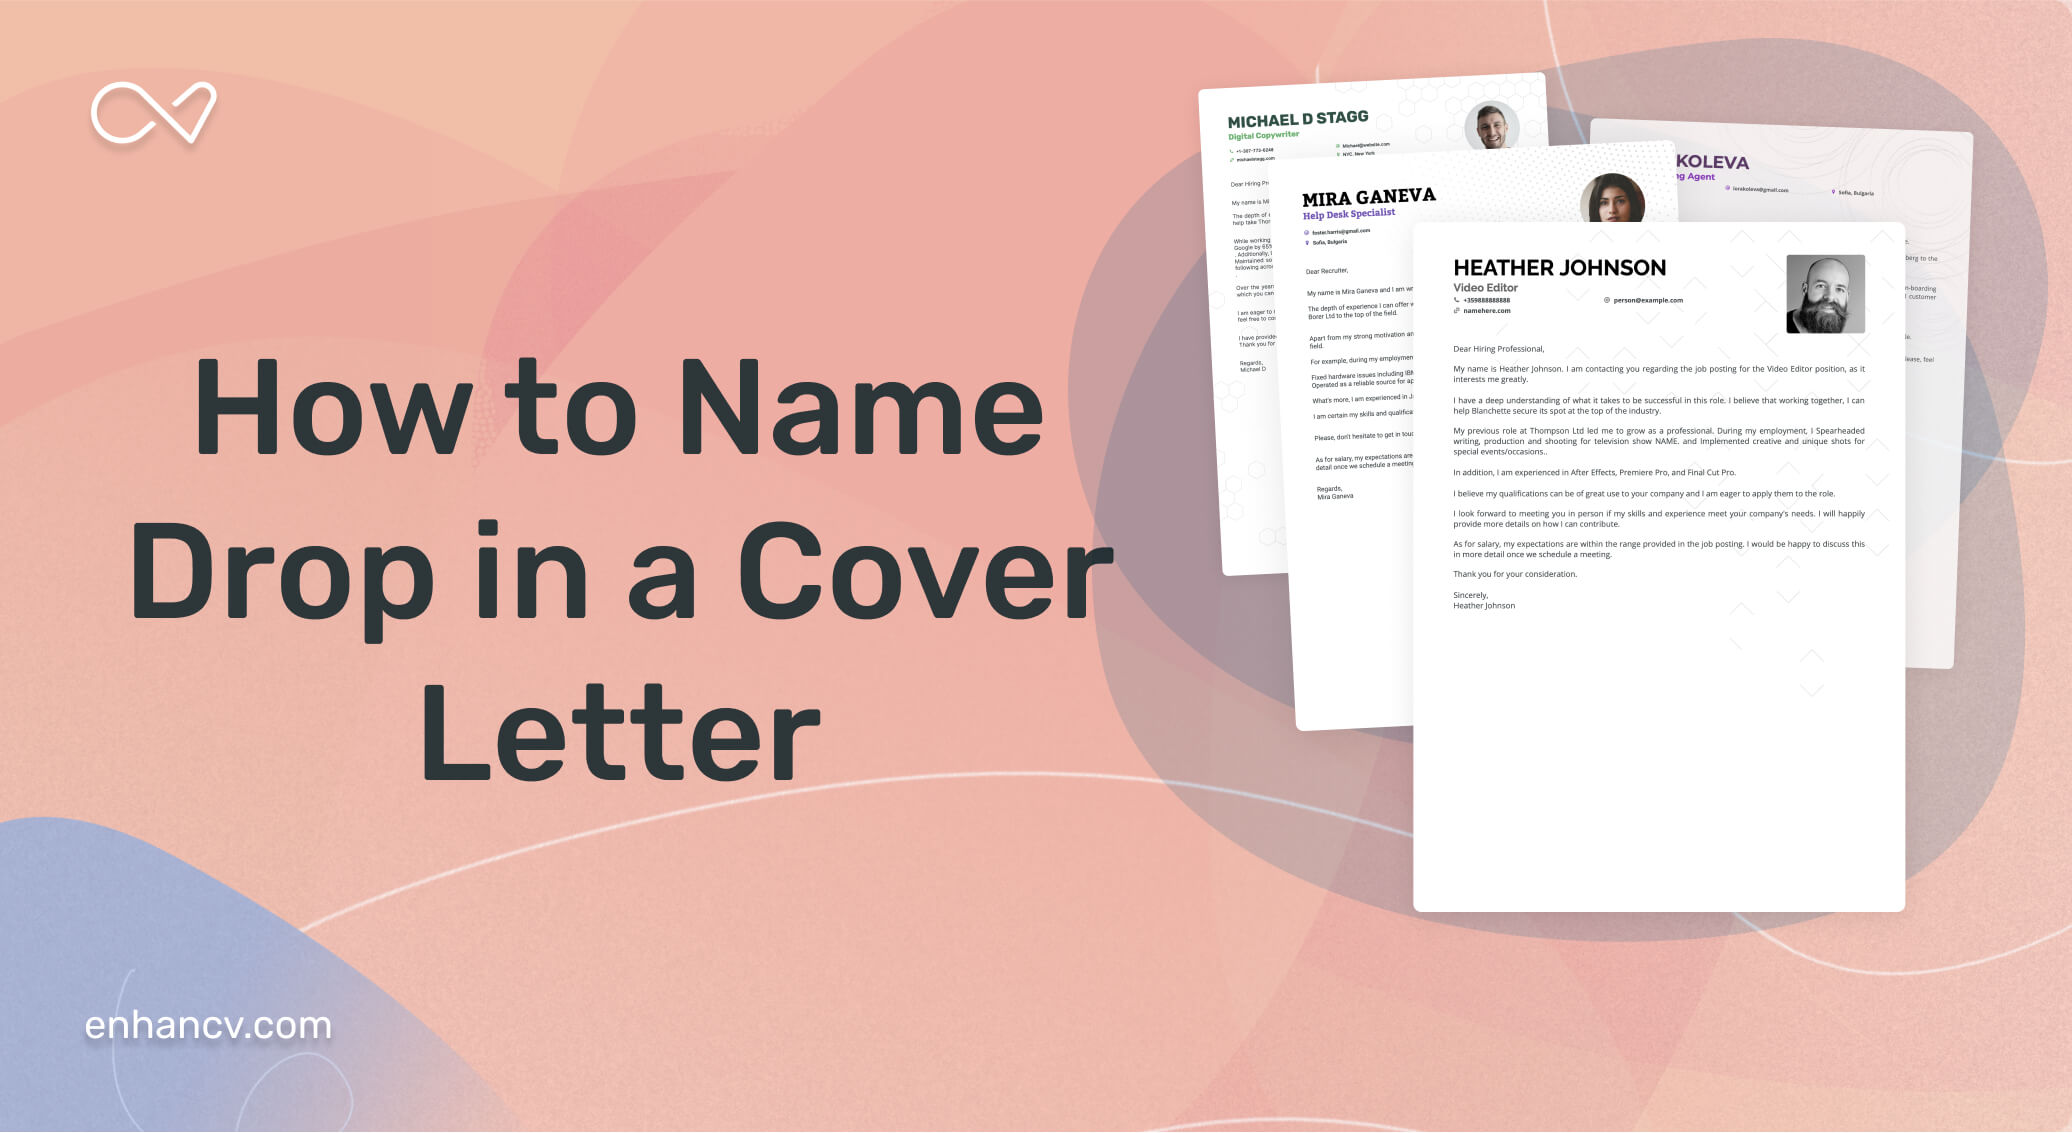 how to name drop in a cover letter